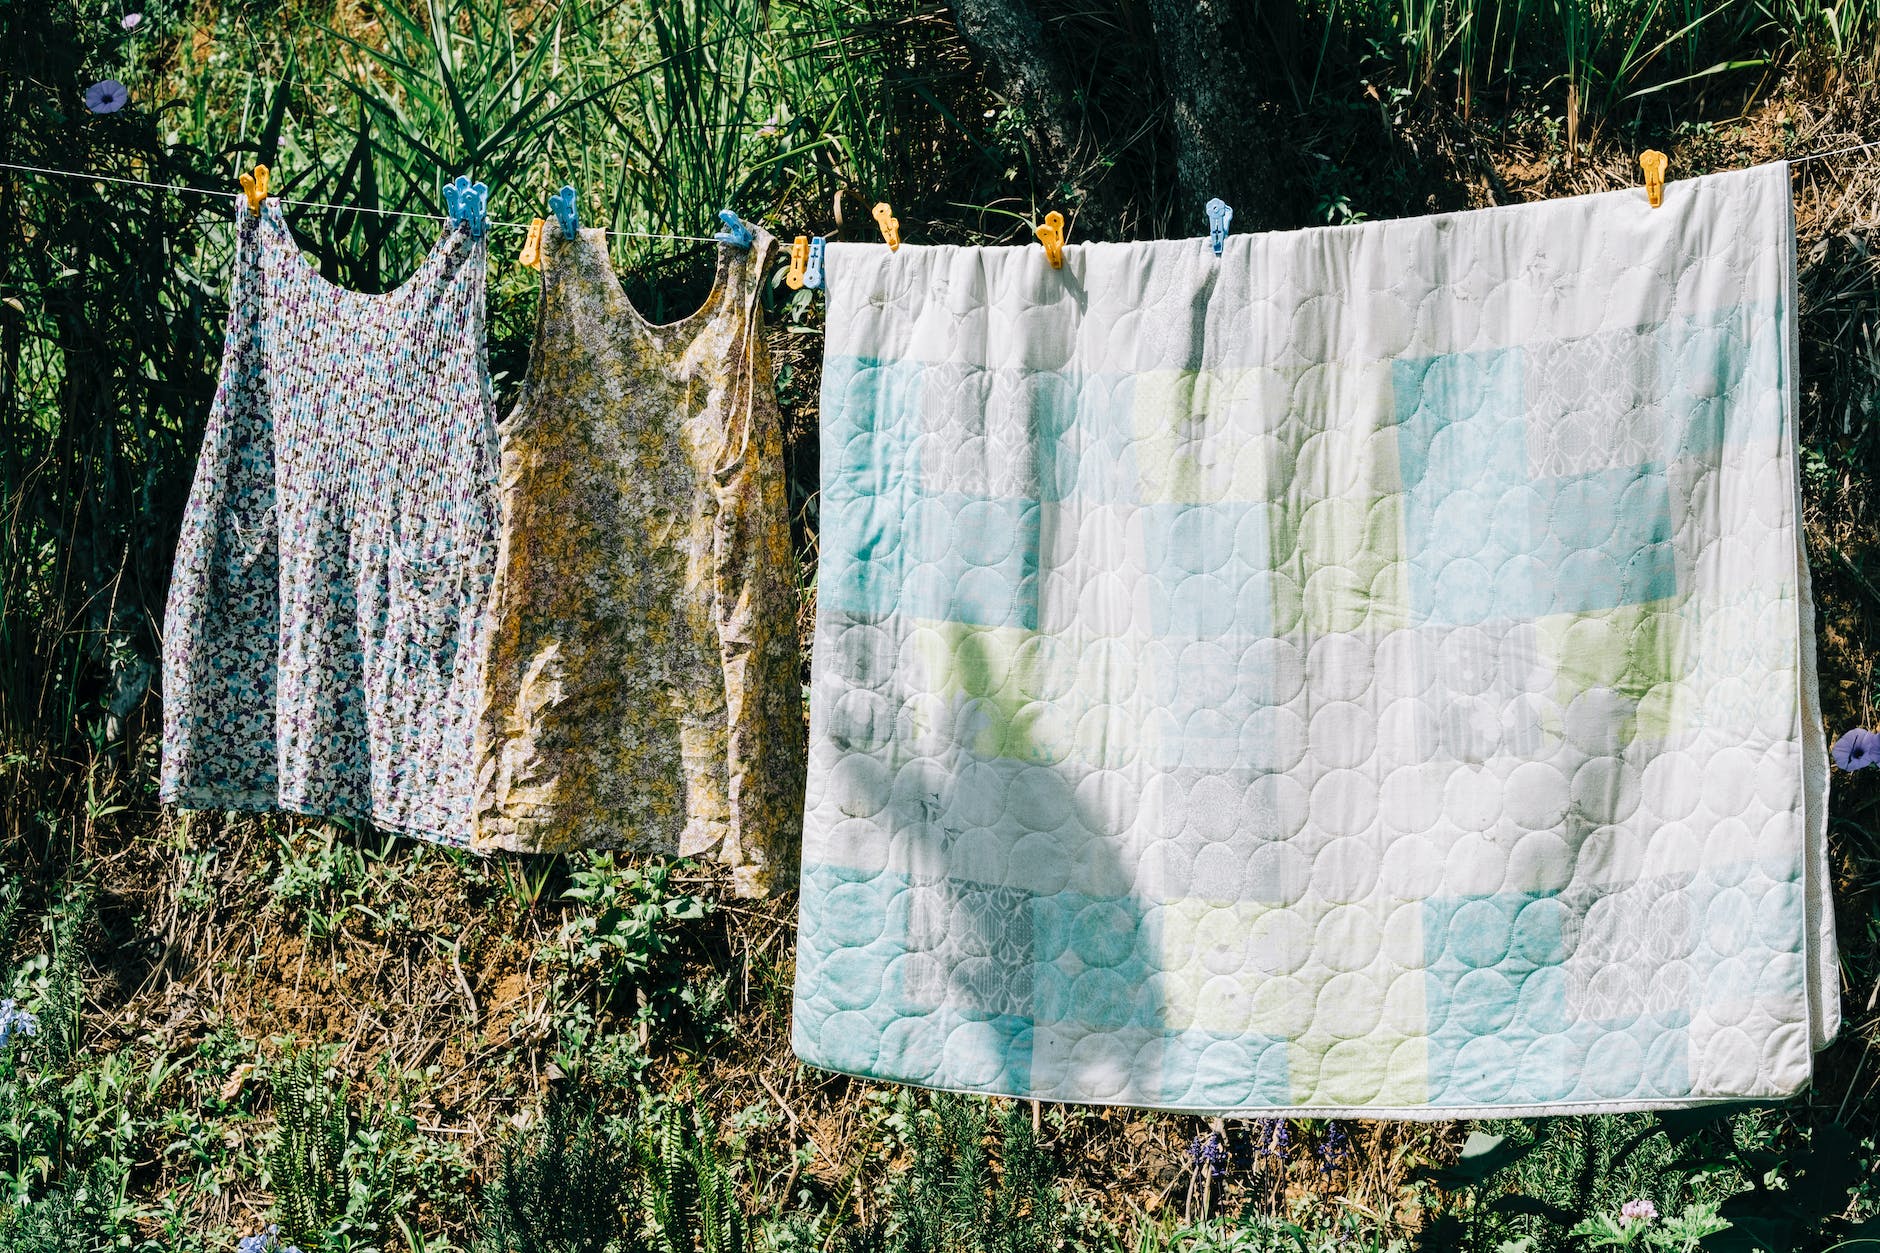 laundry air drying on string